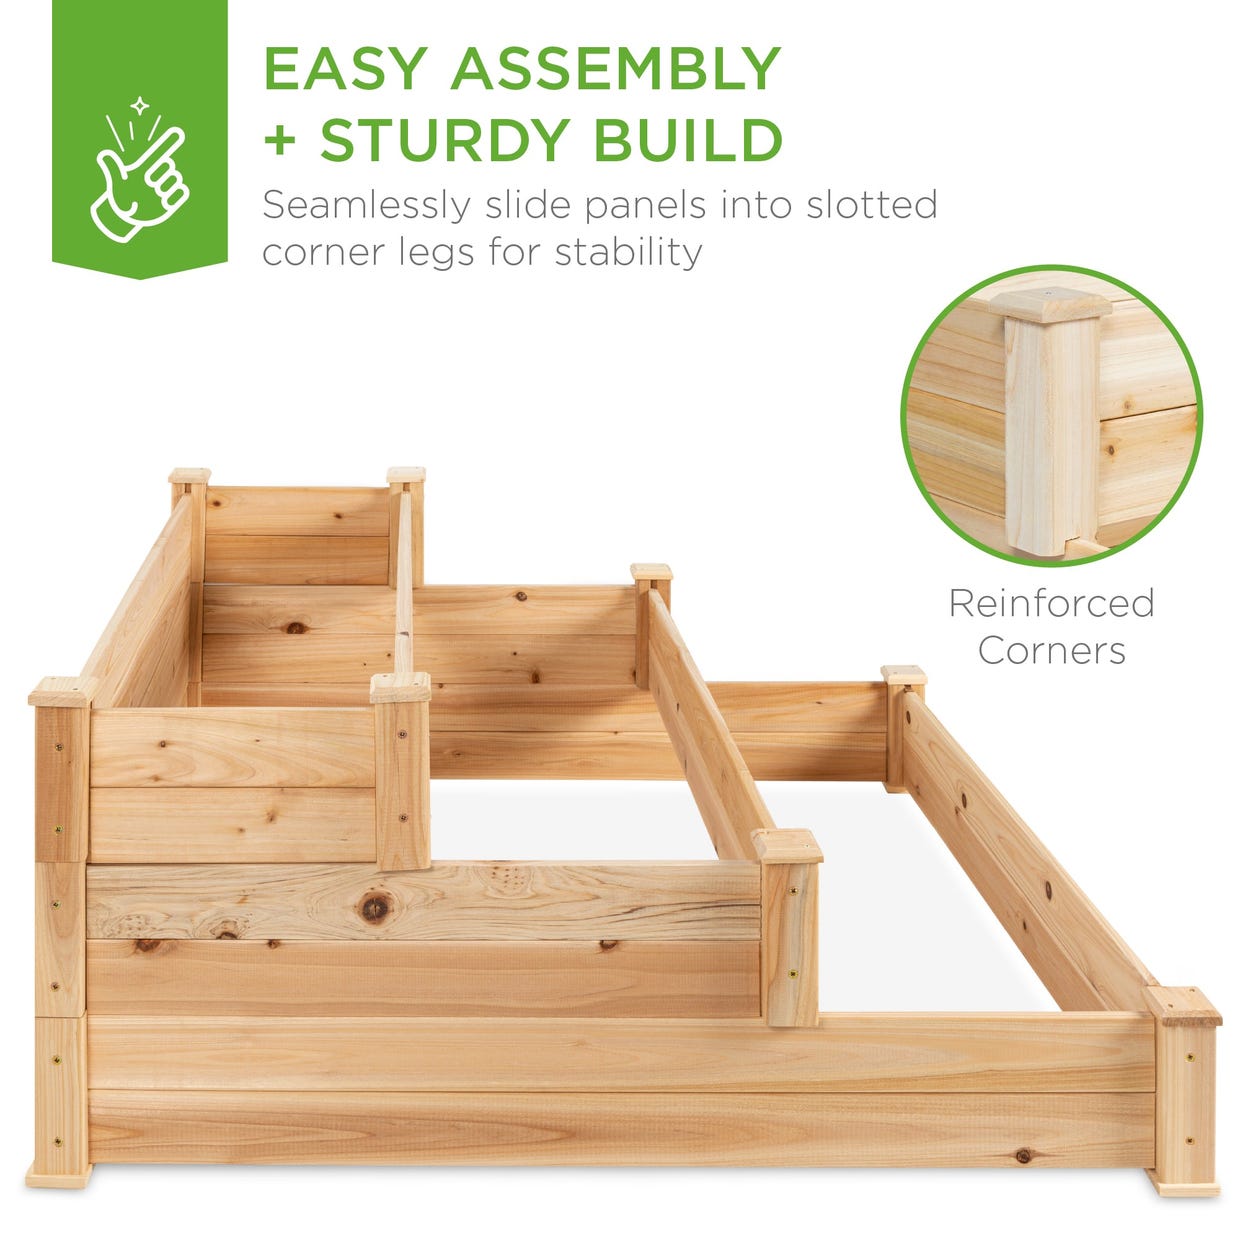 A three-tier wooden garden bed with easy assembly and sturdy build, featuring reinforced corners with seamlessly slotted panel design for stability.